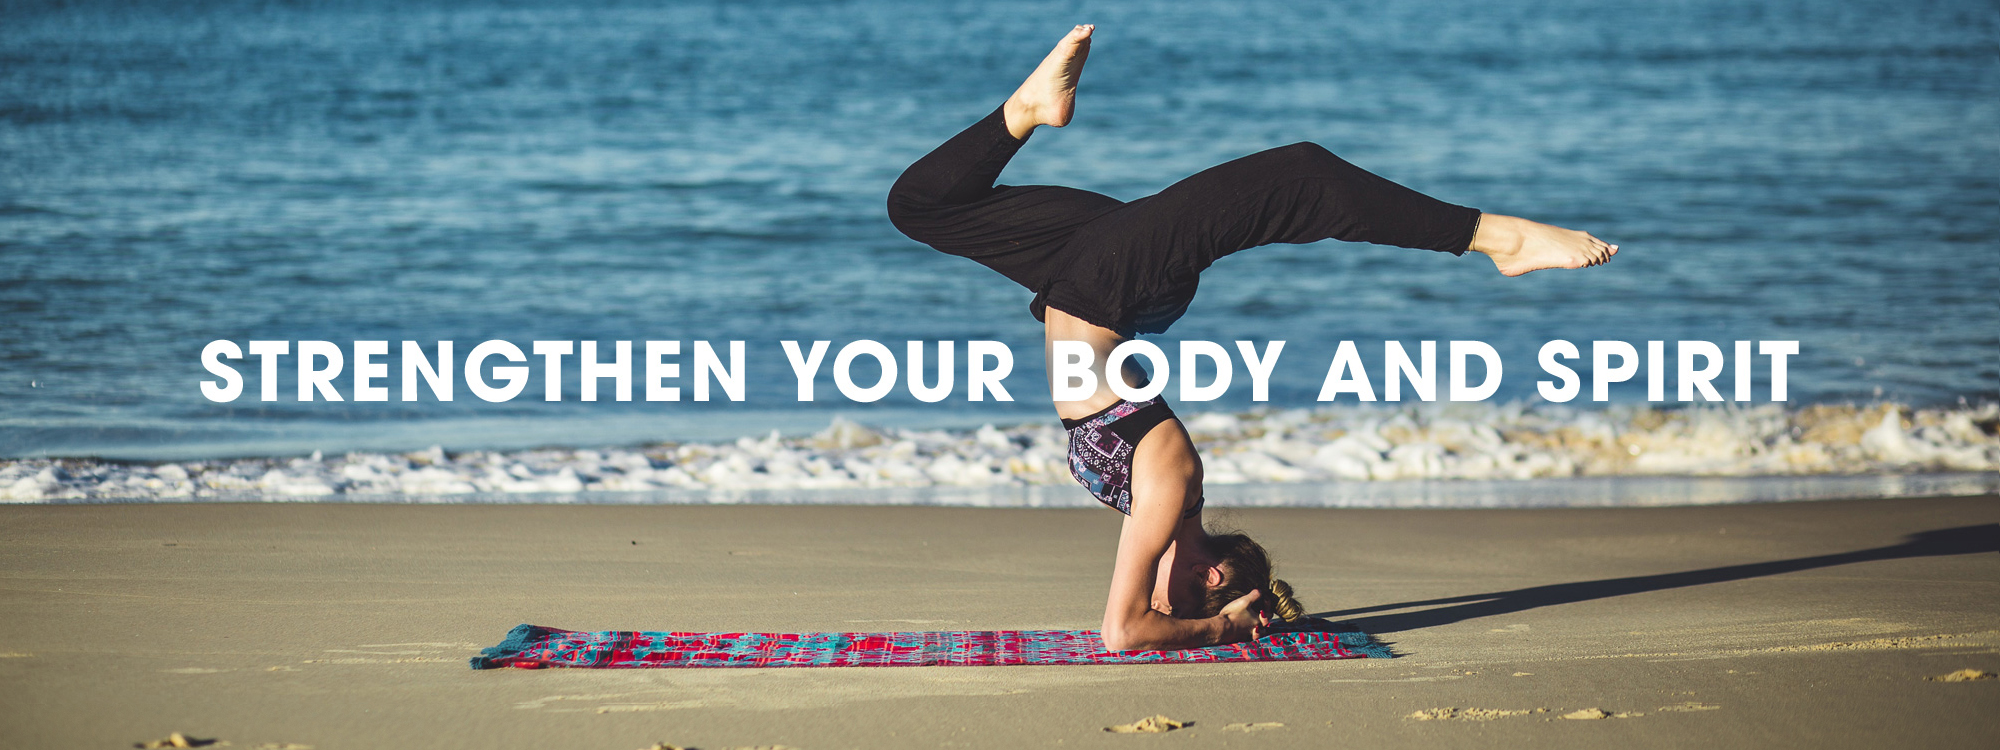 Strengthen your Body and Spirit - Contact us today!